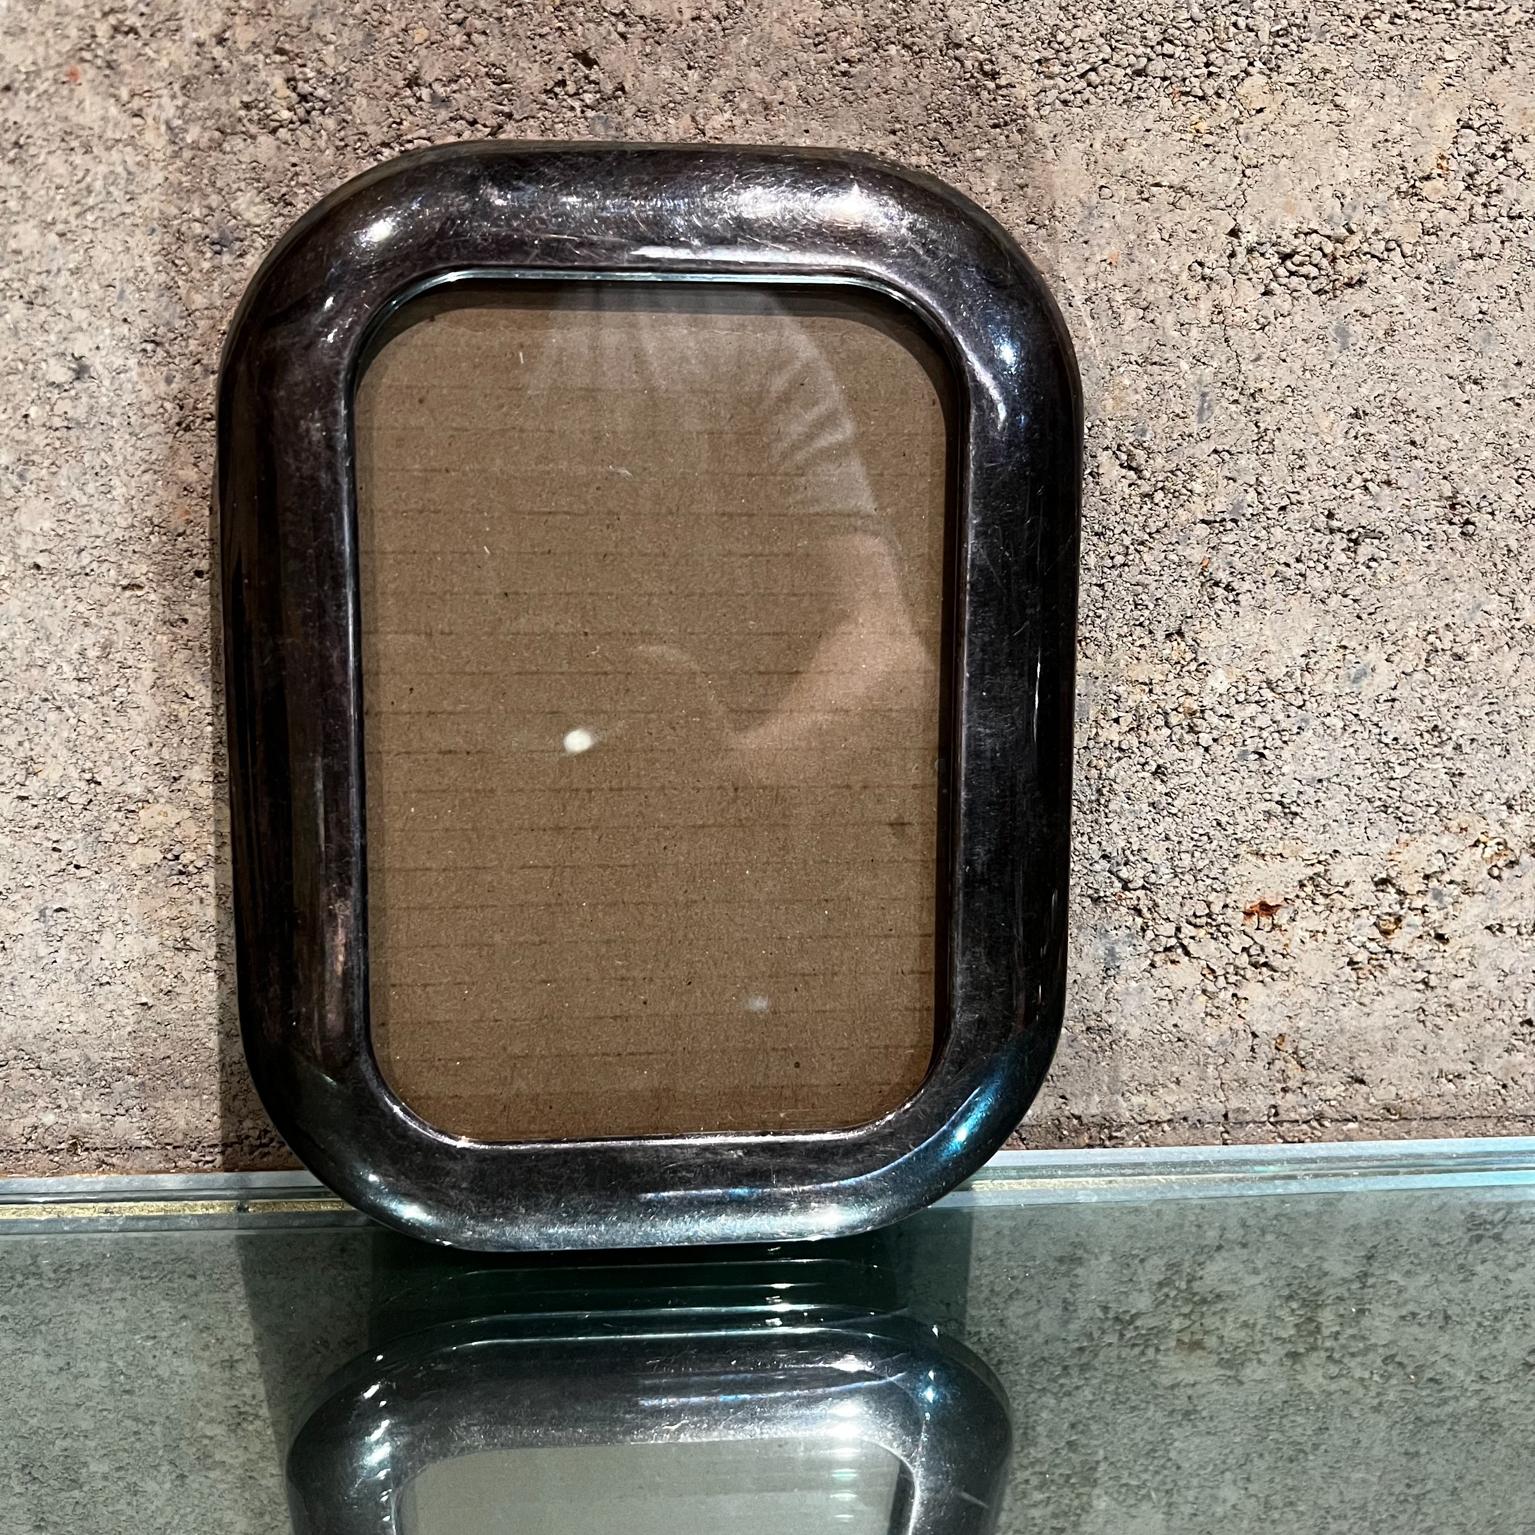 1950s Elegant silver plate vintage picture frame
Rectangular shape 
New glass. 
Black velvet finish on the back. 
Unmarked
Measures: .75 thick x 8.5 x 6.5 (will take 6.5 x 4.5 pictures)
Preowned original vintage condition.
Please Refer to